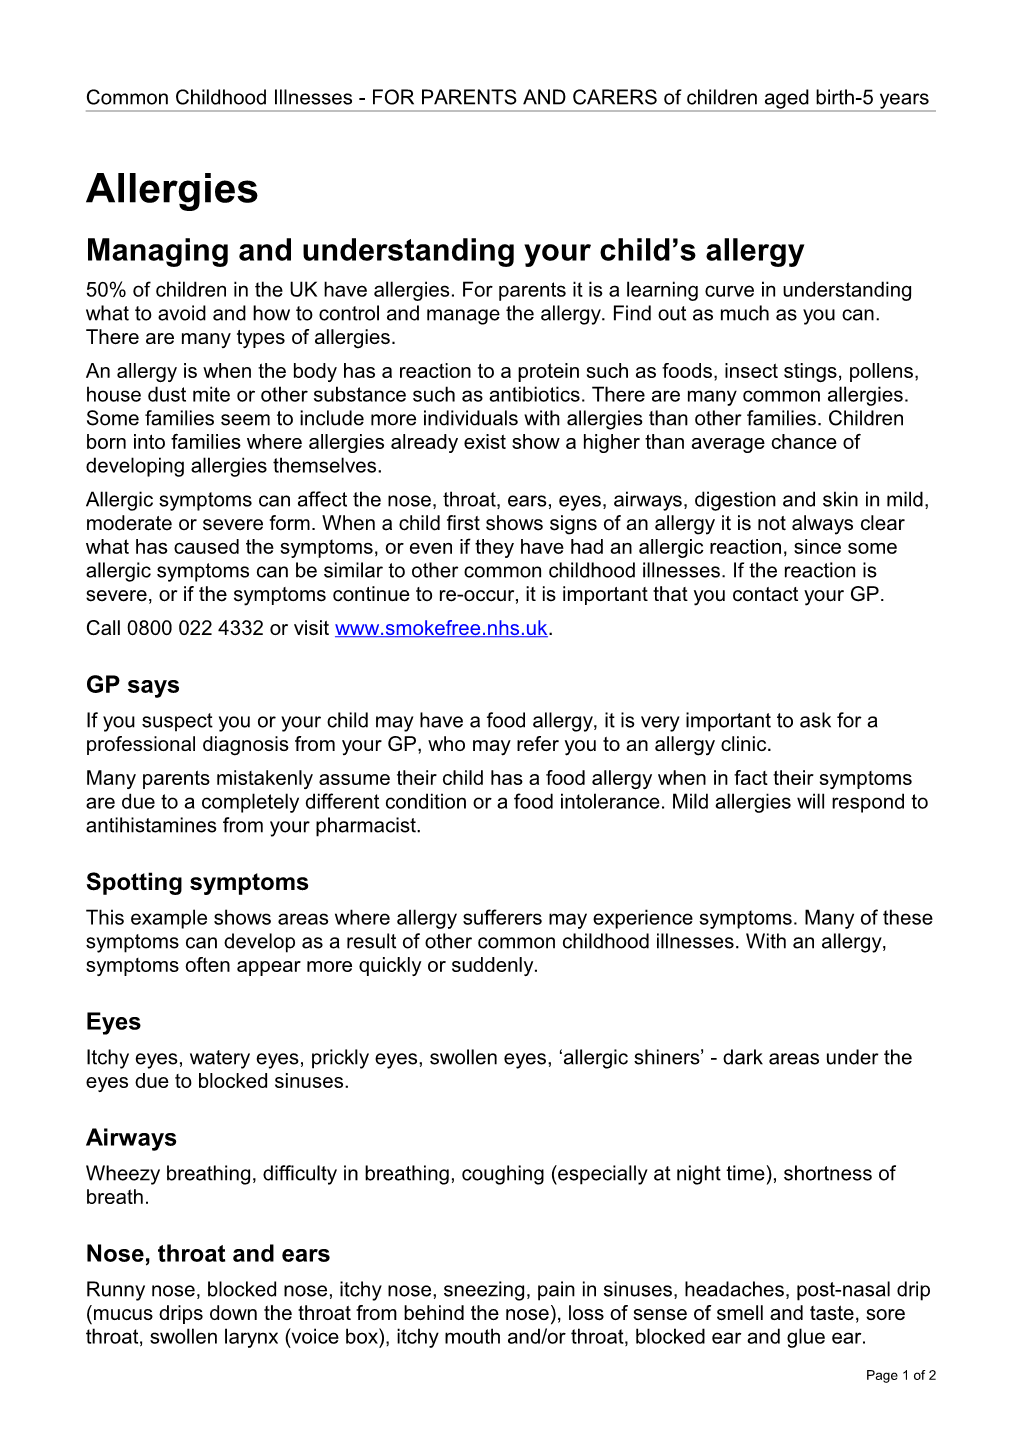 Managing and Understanding Your Child S Allergy